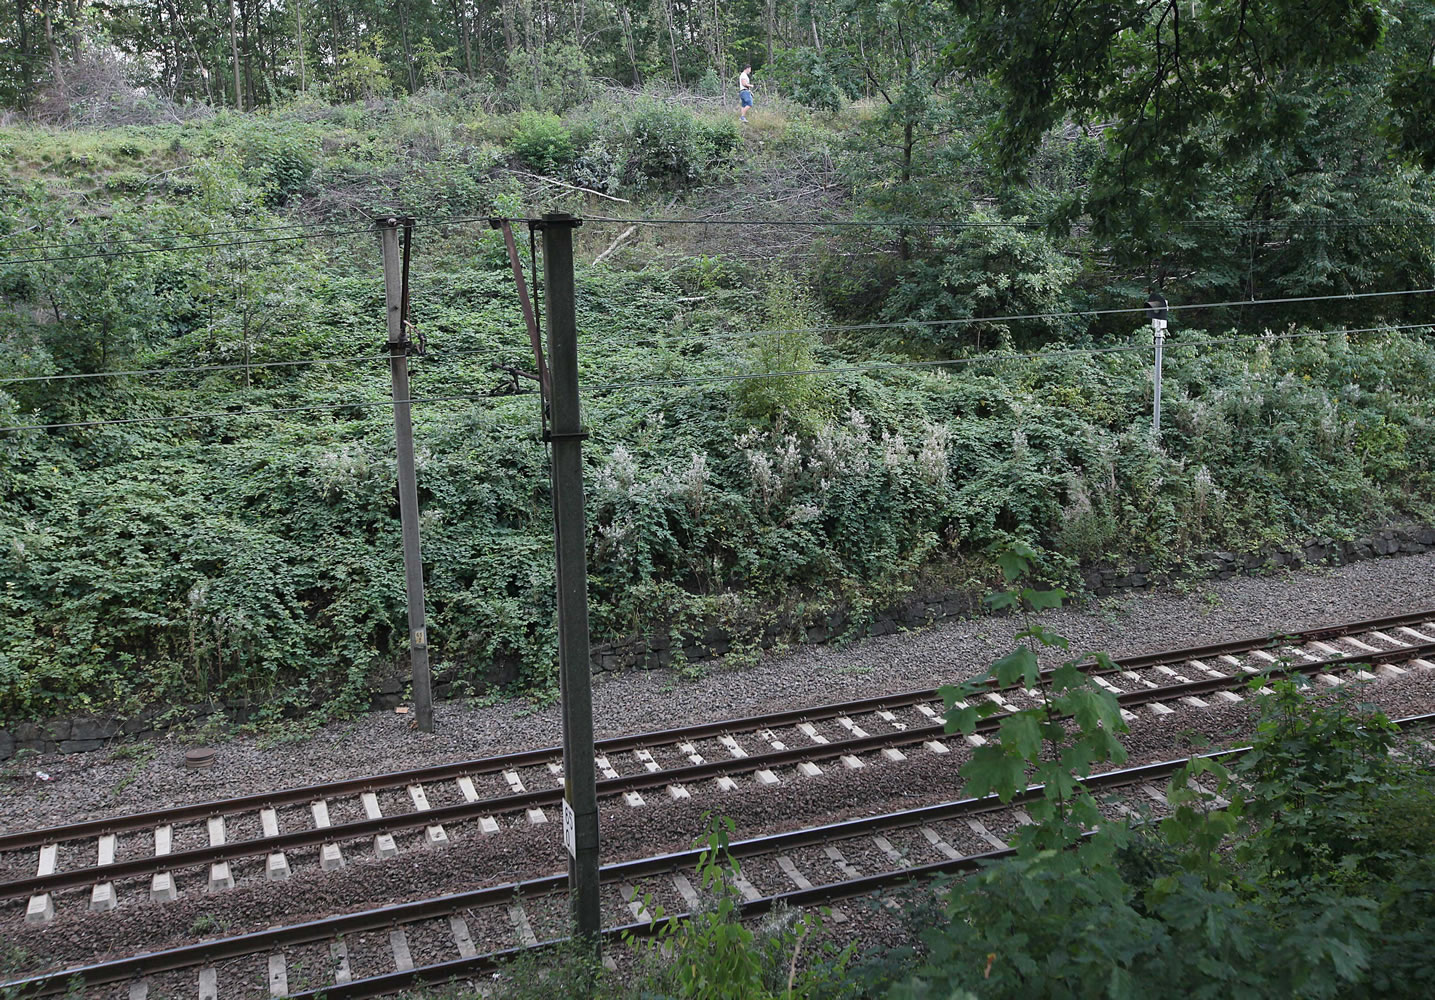 Plainclothed policemen, top, patrol over the site near a local train line, near to the alleged location where a Nazi train carrying gold and treasures is hidden in a collapsed tunnel near to Walbrzych, Poland, Tuesday, Sept. 1, 2015.  Polish authorities have secured the area to prevent treasure hunters and inquisitive local people from accessing the site, after reports were published alleging two men had found an armed train carrying valuables, that reportedly went missing in 1945.